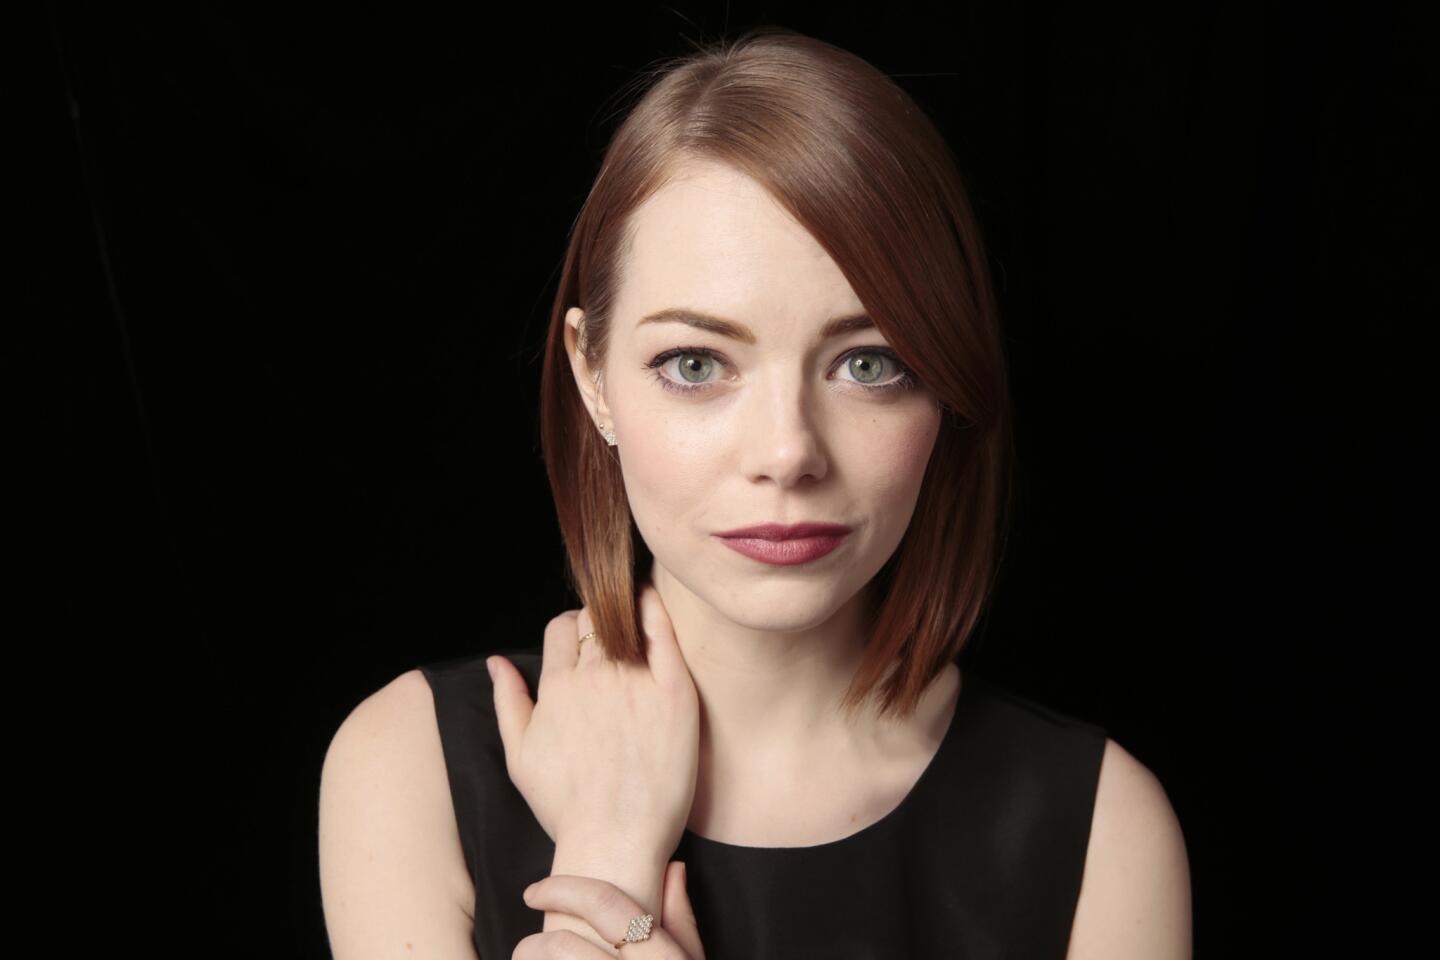 Emma Stone is currently flying high, having recently been nominated for an Oscar for "Birdman" along with making her Broadway debut in "Cabaret." Here are some highlights of her career so far.